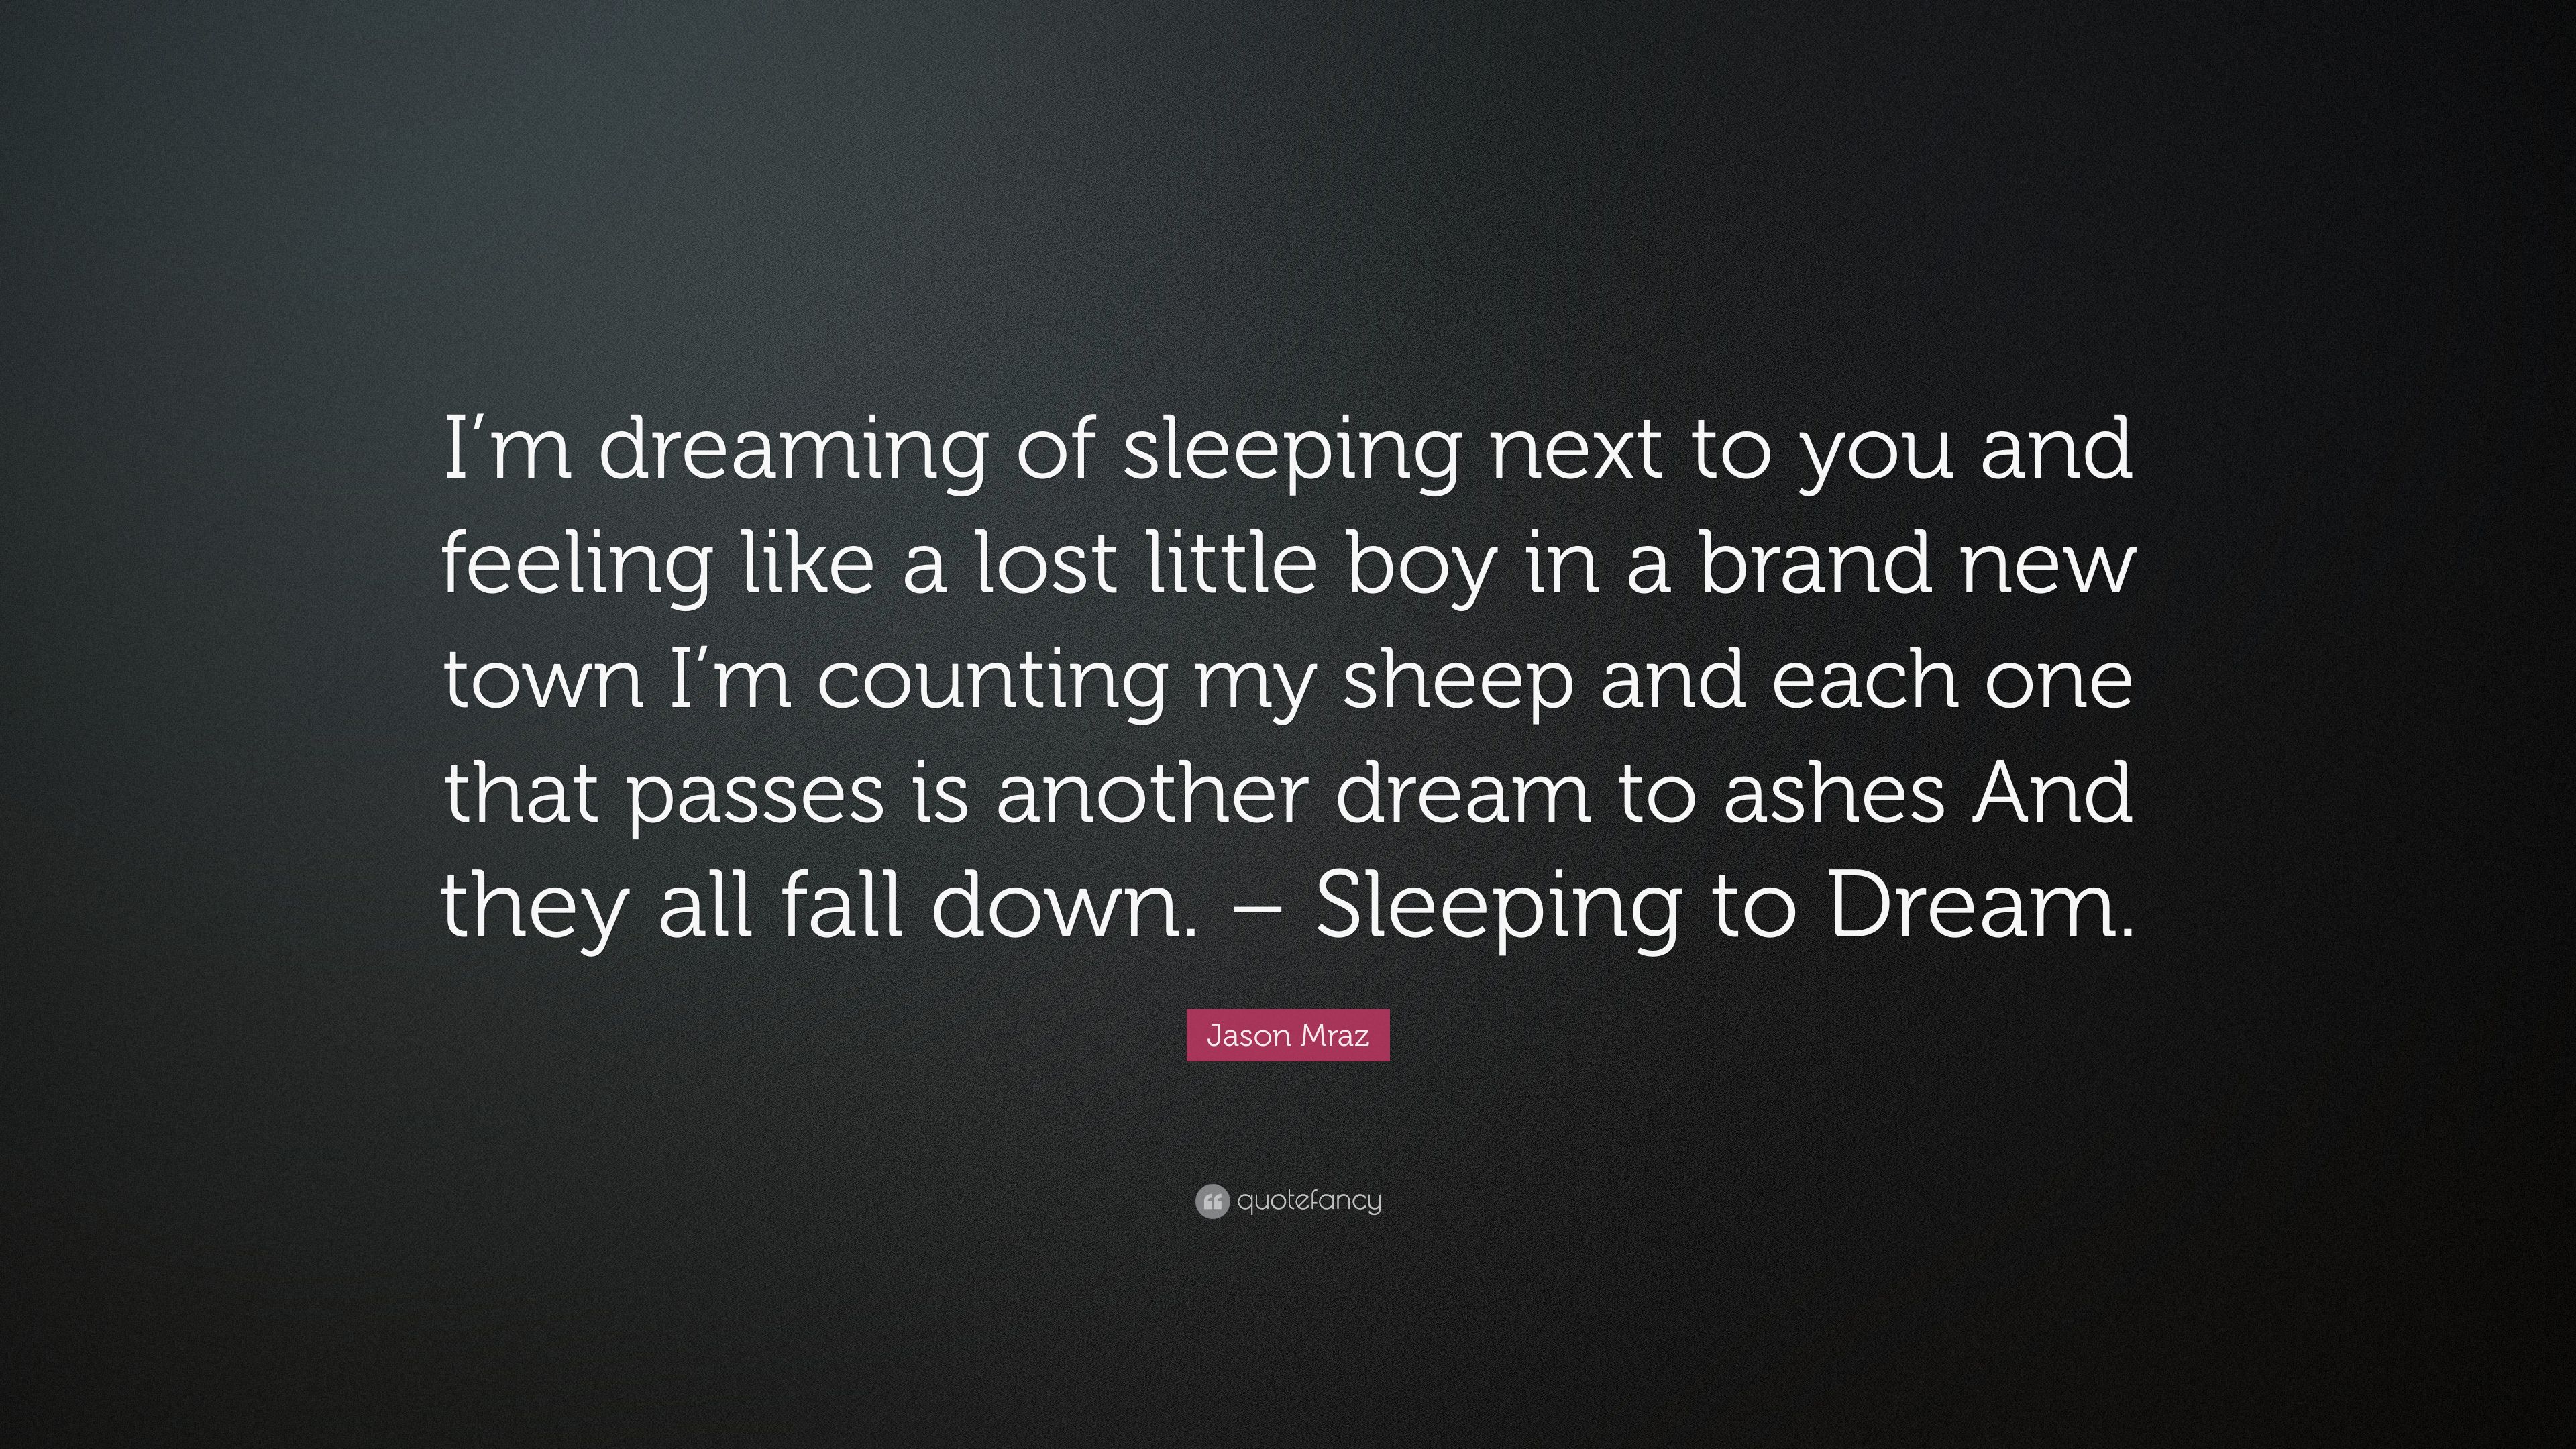 Jason Mraz Quote: “I'm dreaming of sleeping next to you and feeling